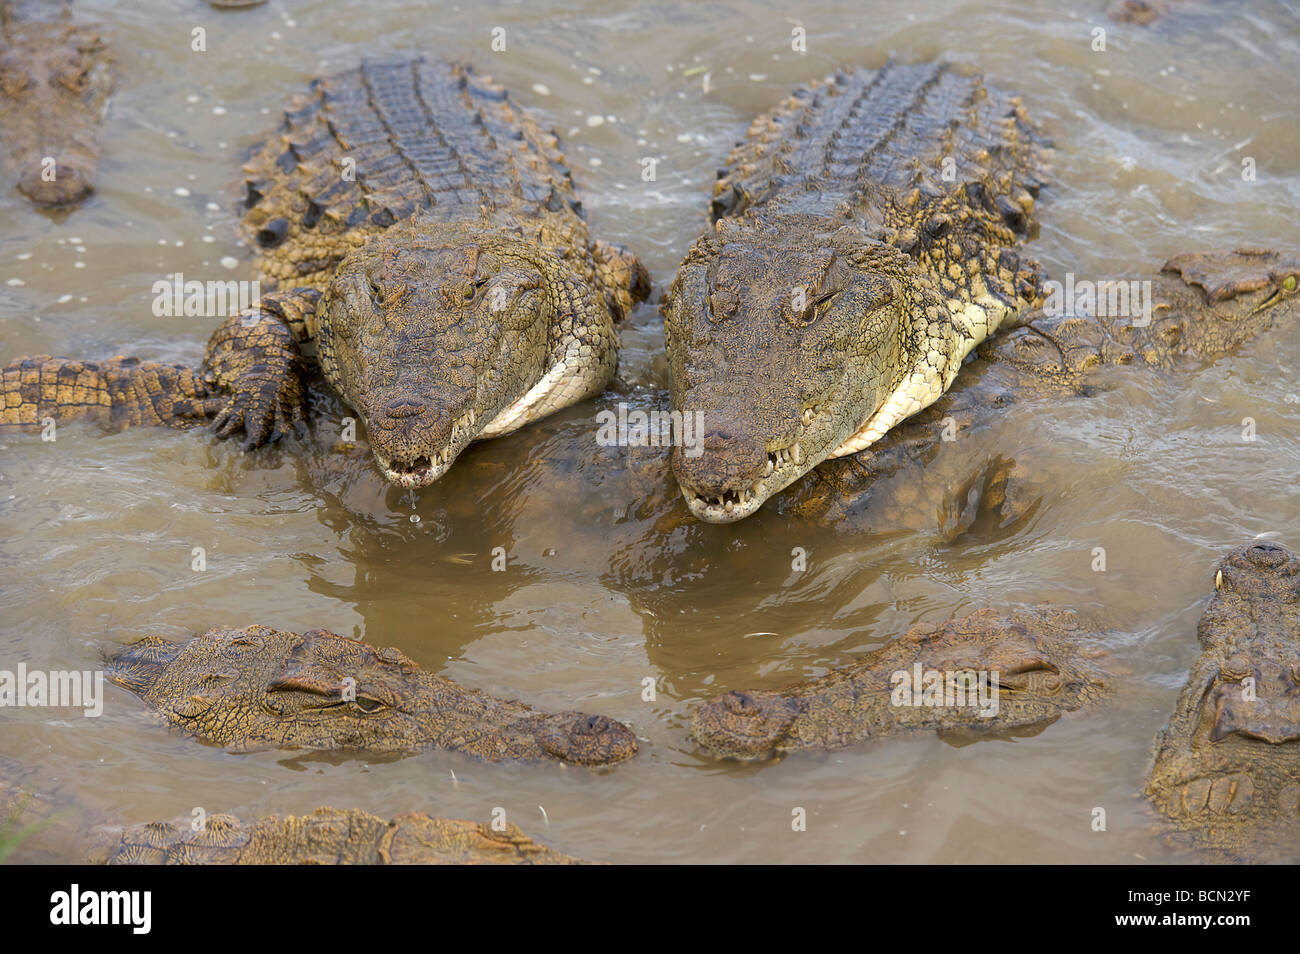 Pair of Nile Crocodiles on top of others Stock Photo